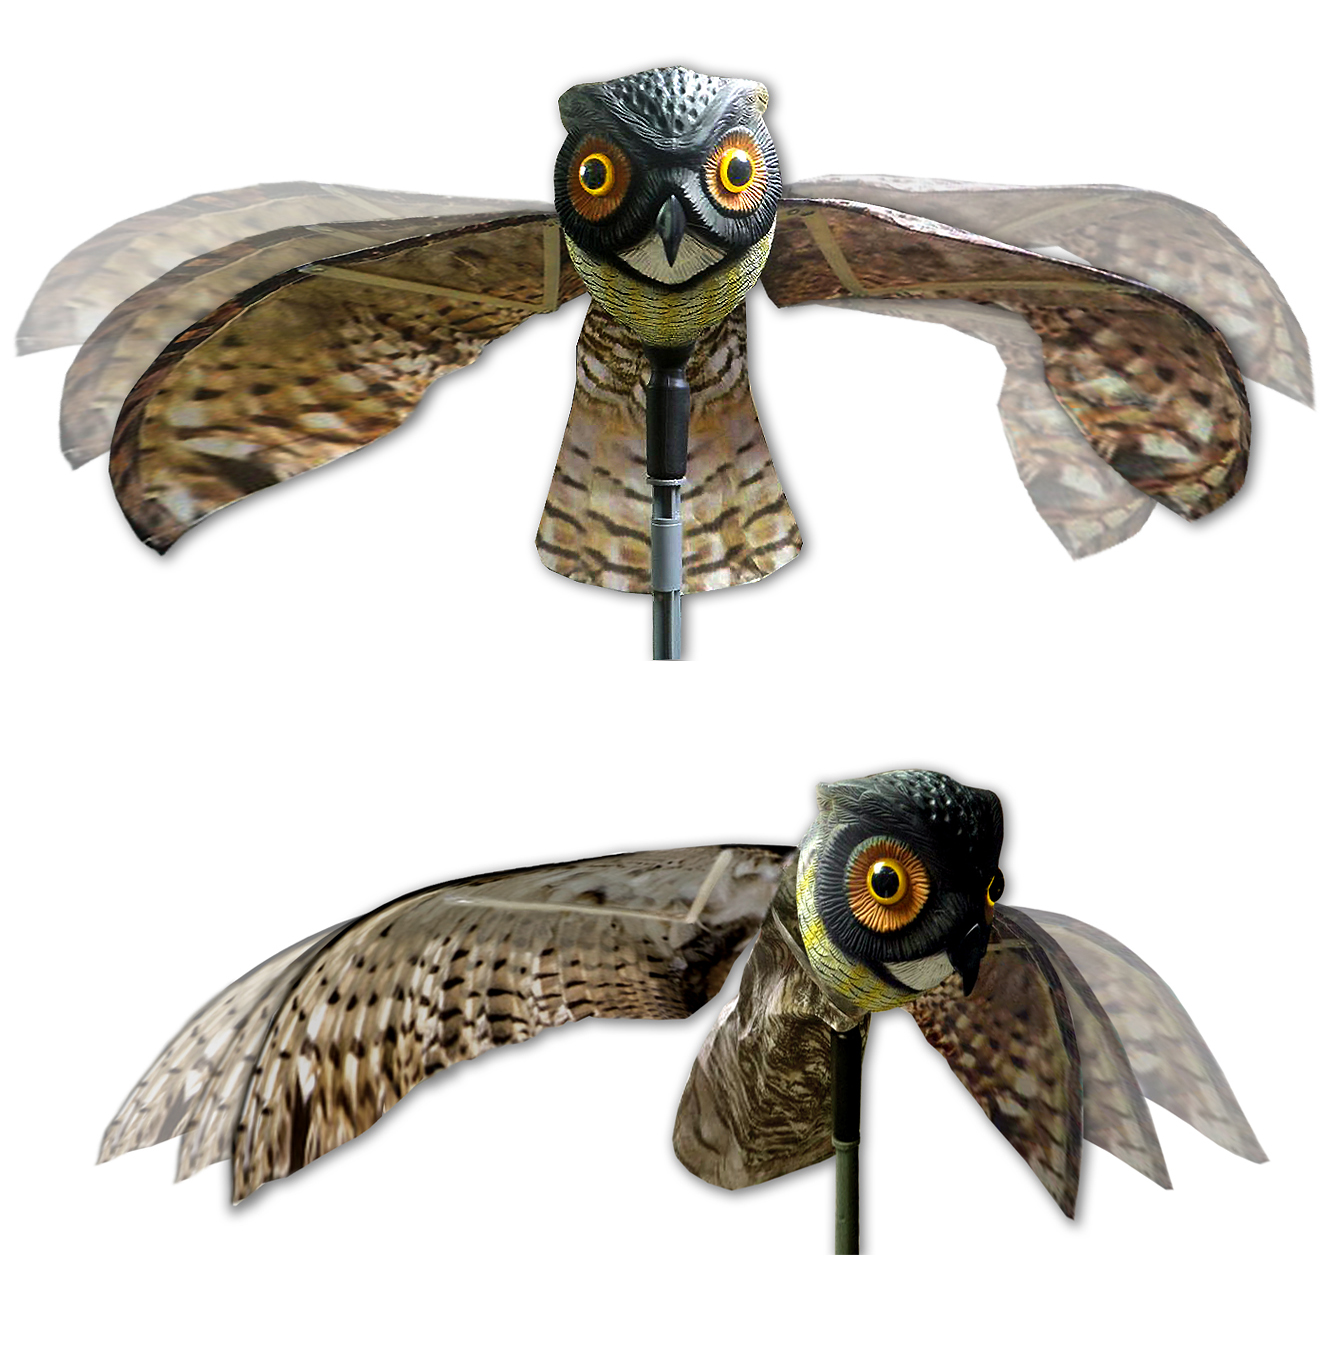 Bird-X Prowler Owl Realistic Owl Decoy Scarecrow Flapping Wings Repel Pigeons Seagulls Bird Pest Control Natural Brown - image 5 of 5